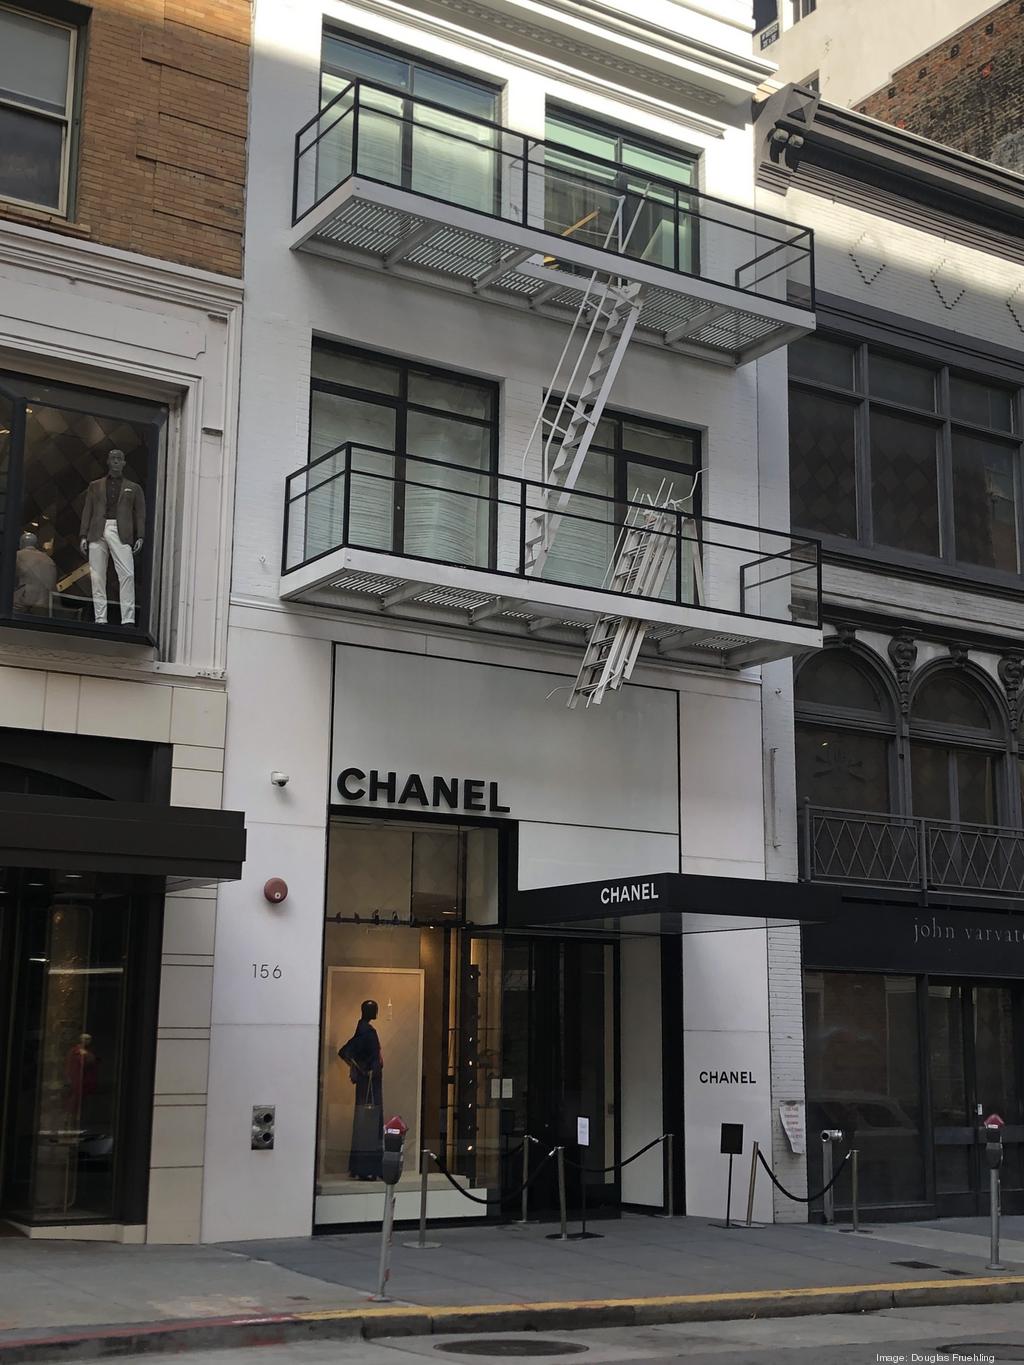 Chanel buys San Francisco Union Square building for $63 million